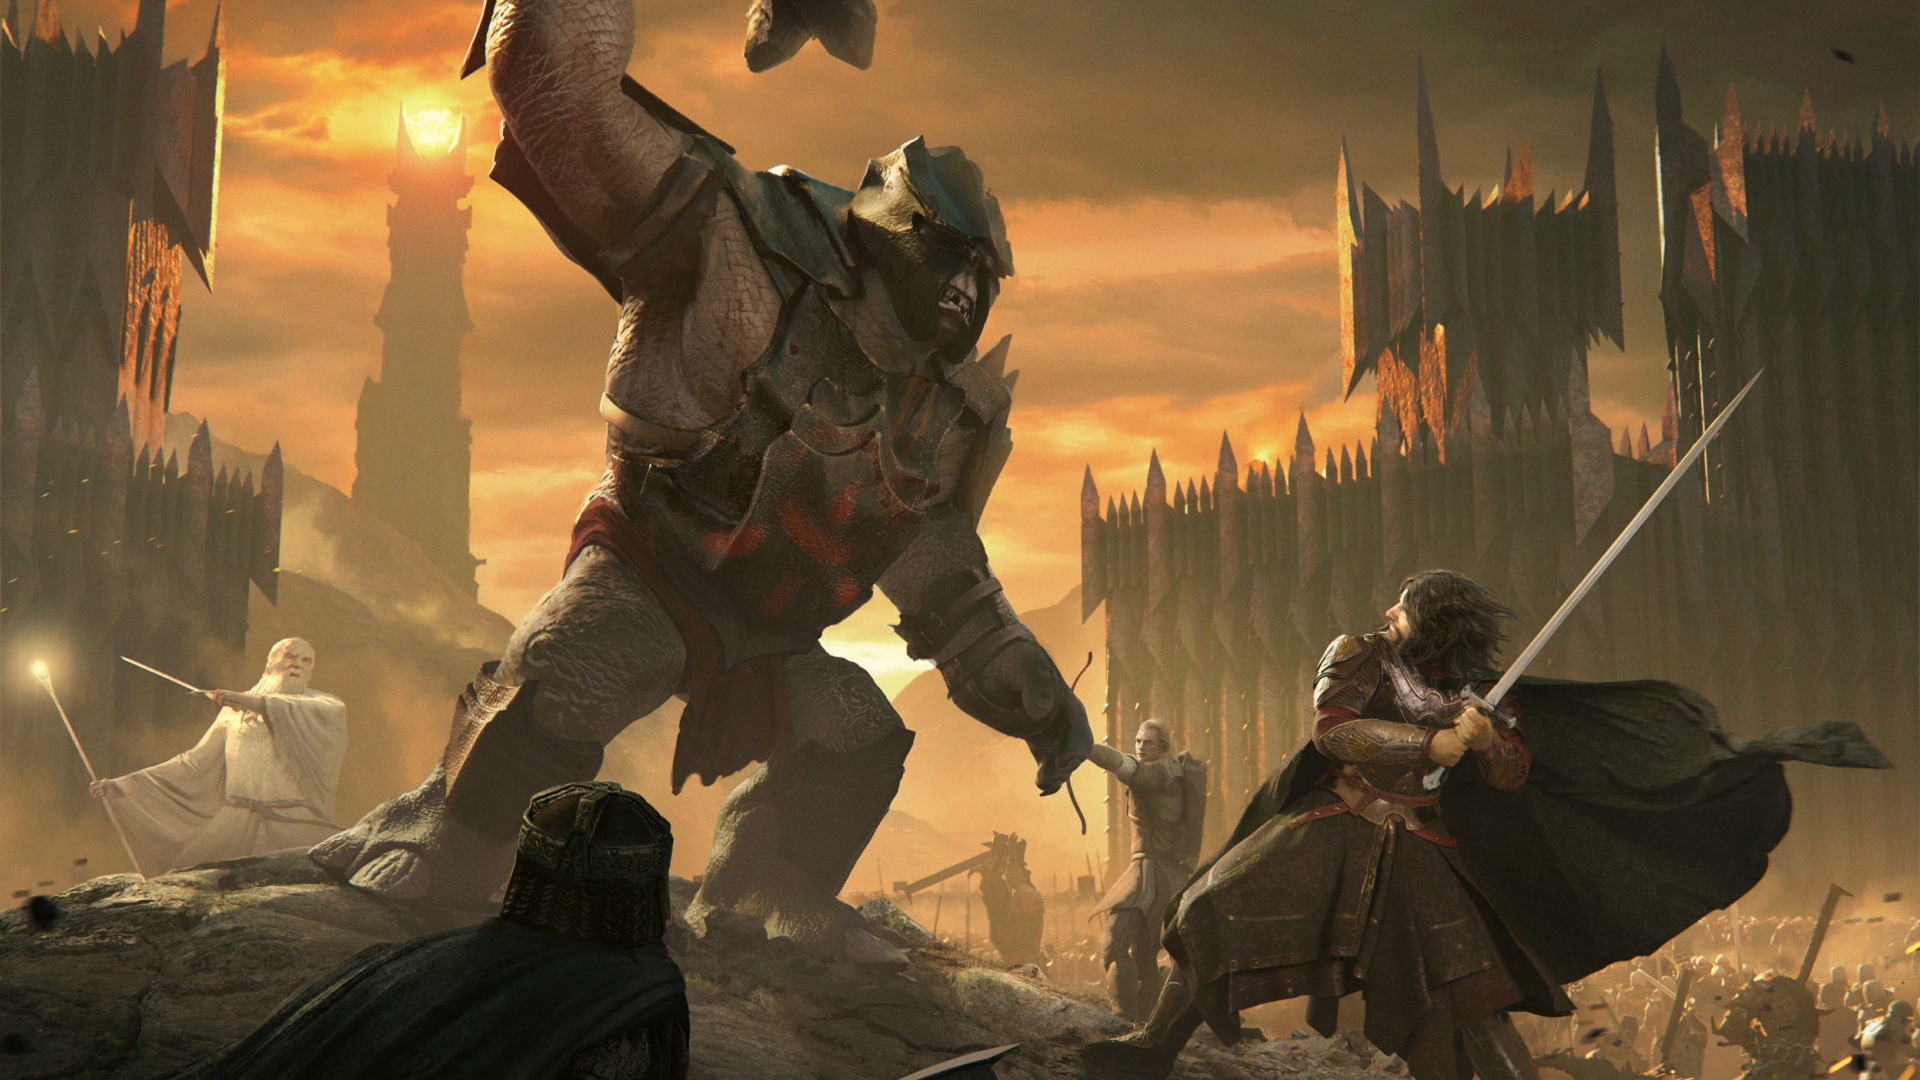 Best wizard games: Lord of the Rings: War. Image shows a large orc about to take a swing at a small soldier.